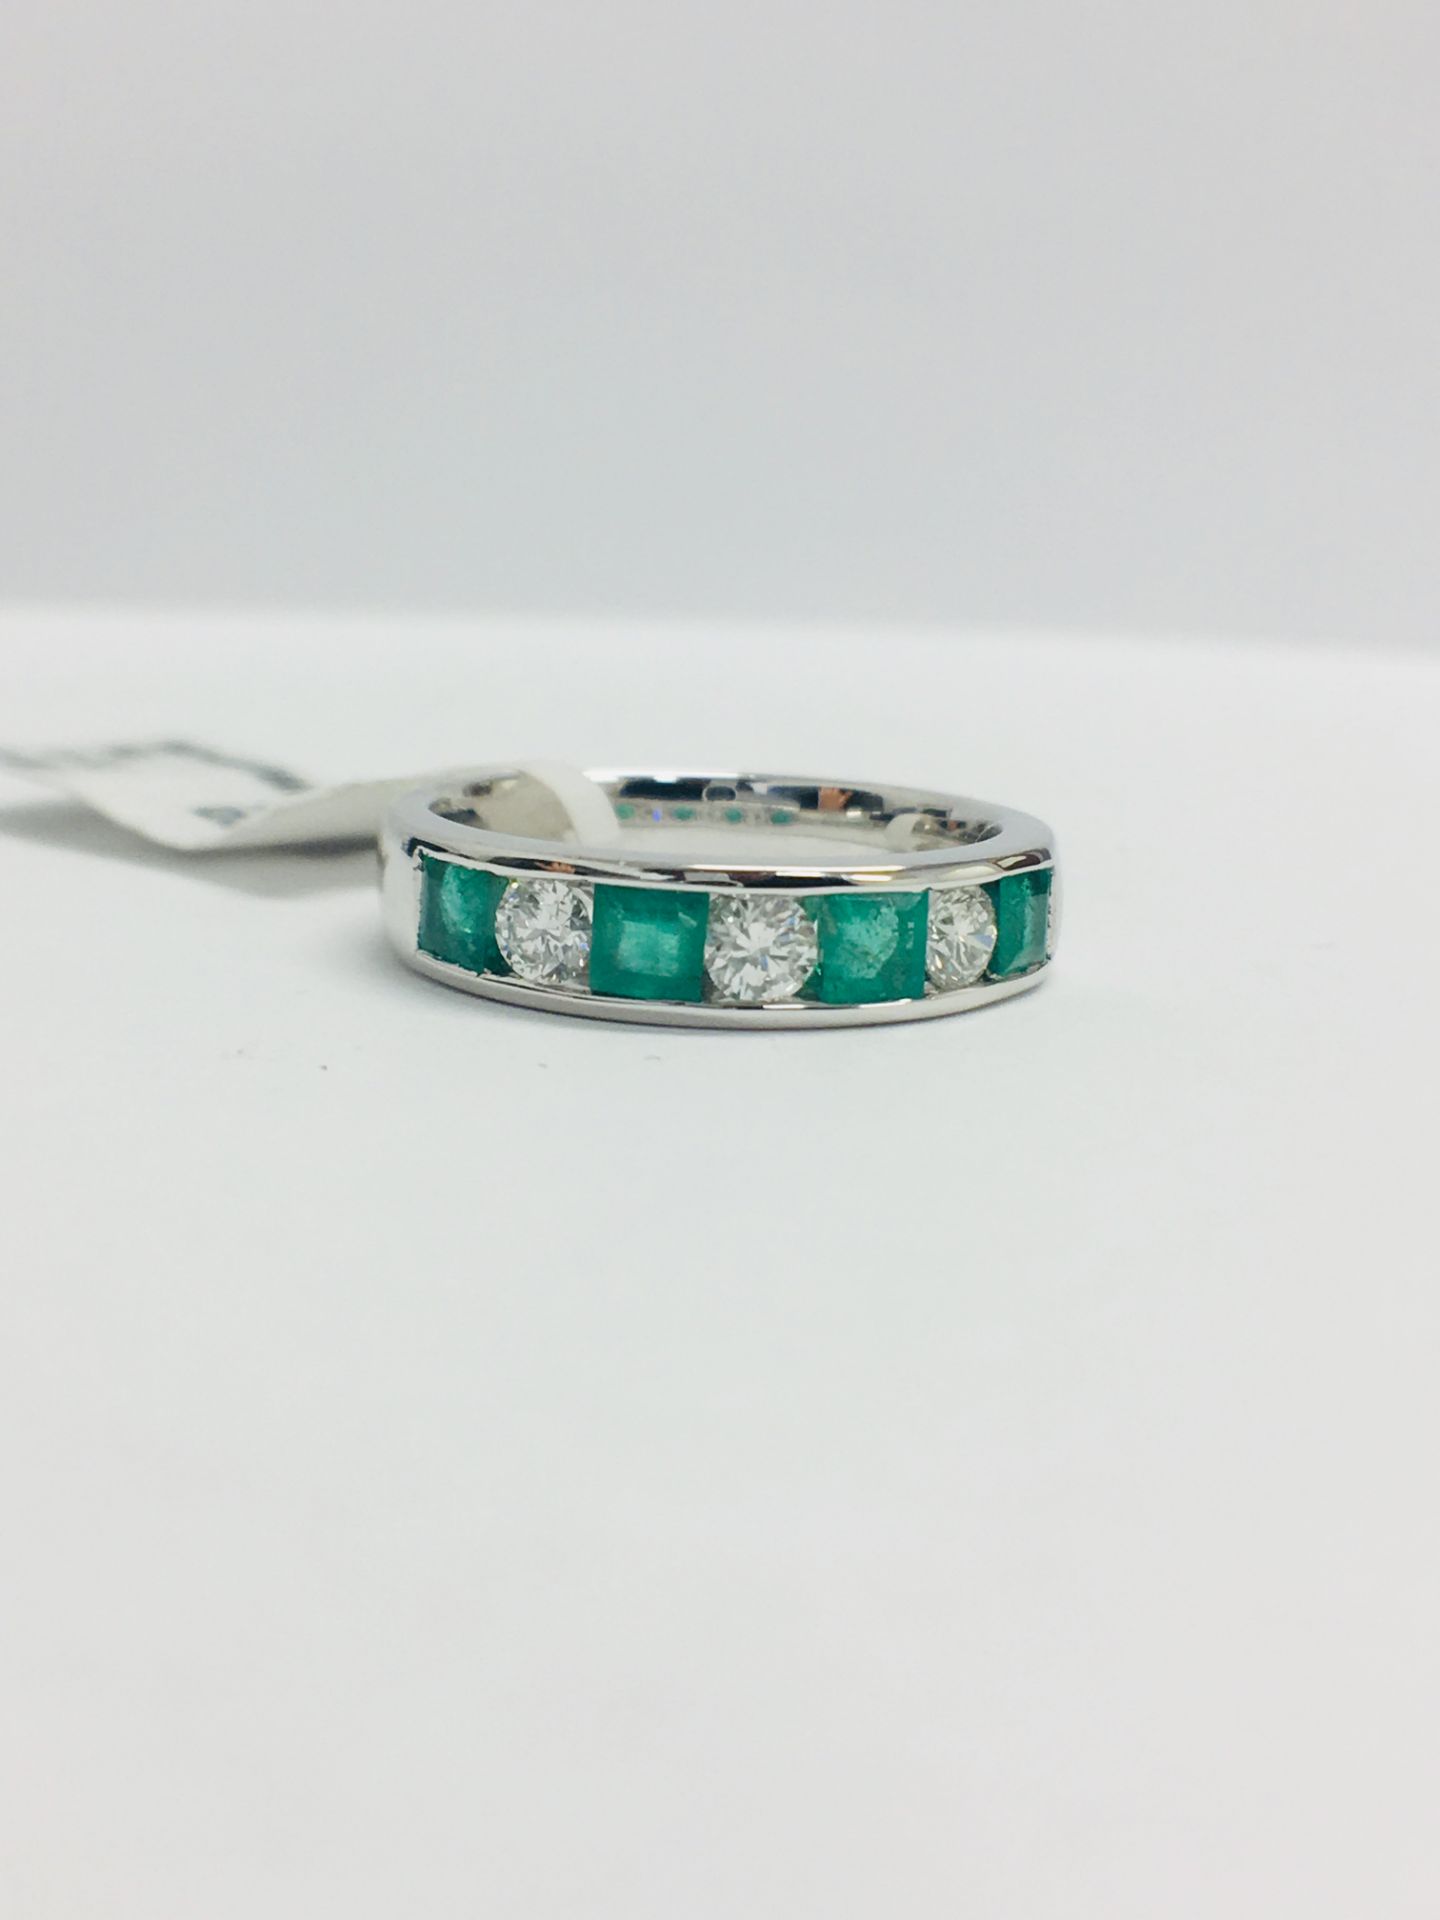 9ct White Gold Emerald Diamond Channel Set Ring - Image 11 of 13